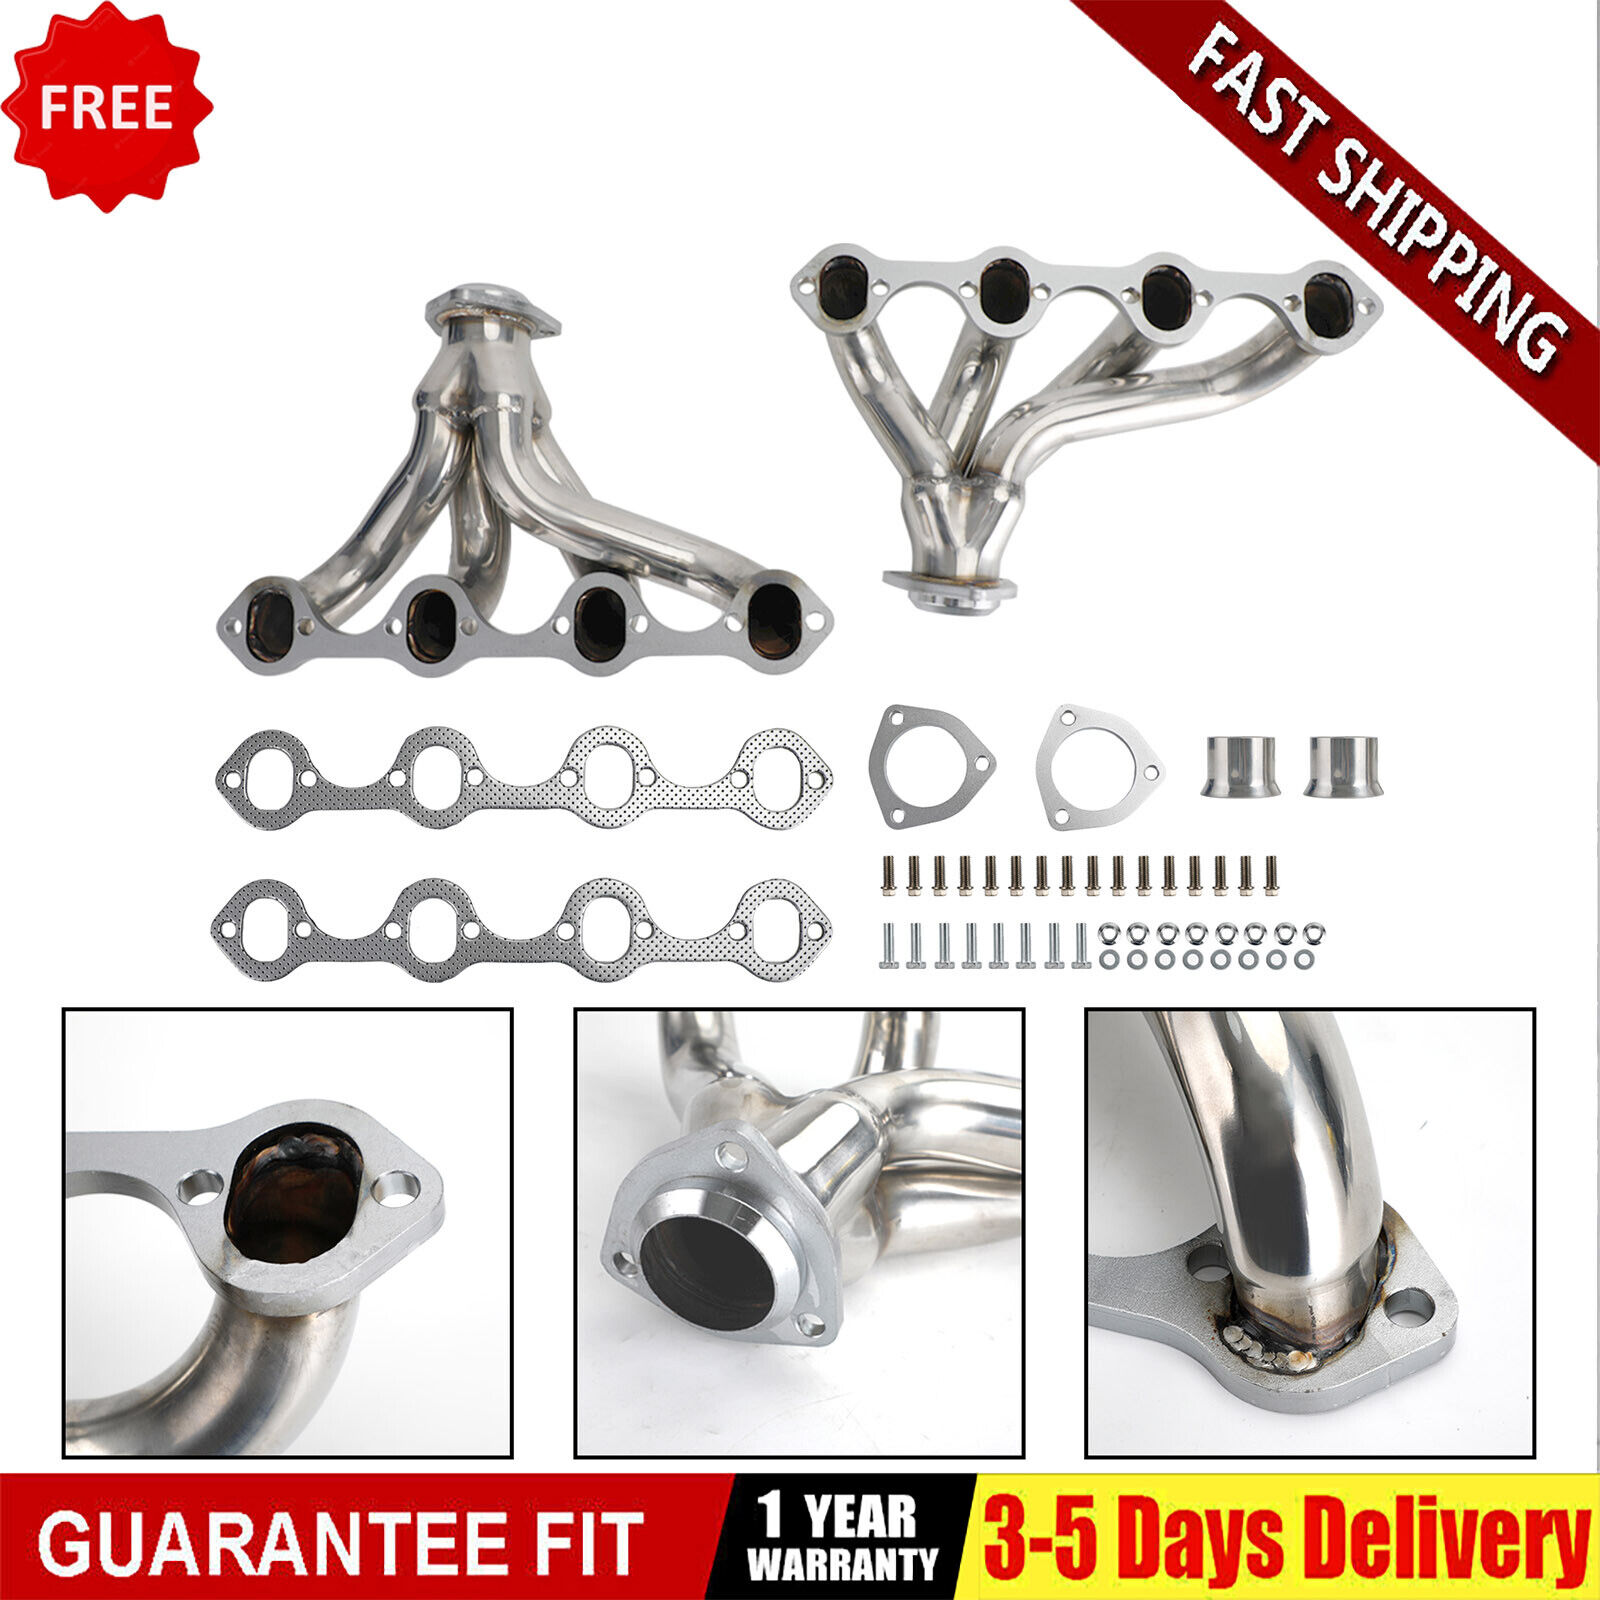 Stainless Exhaust Headers Kit For Ford Mustang 289 302 351 4.7L 5.0L 5.8L 64-73